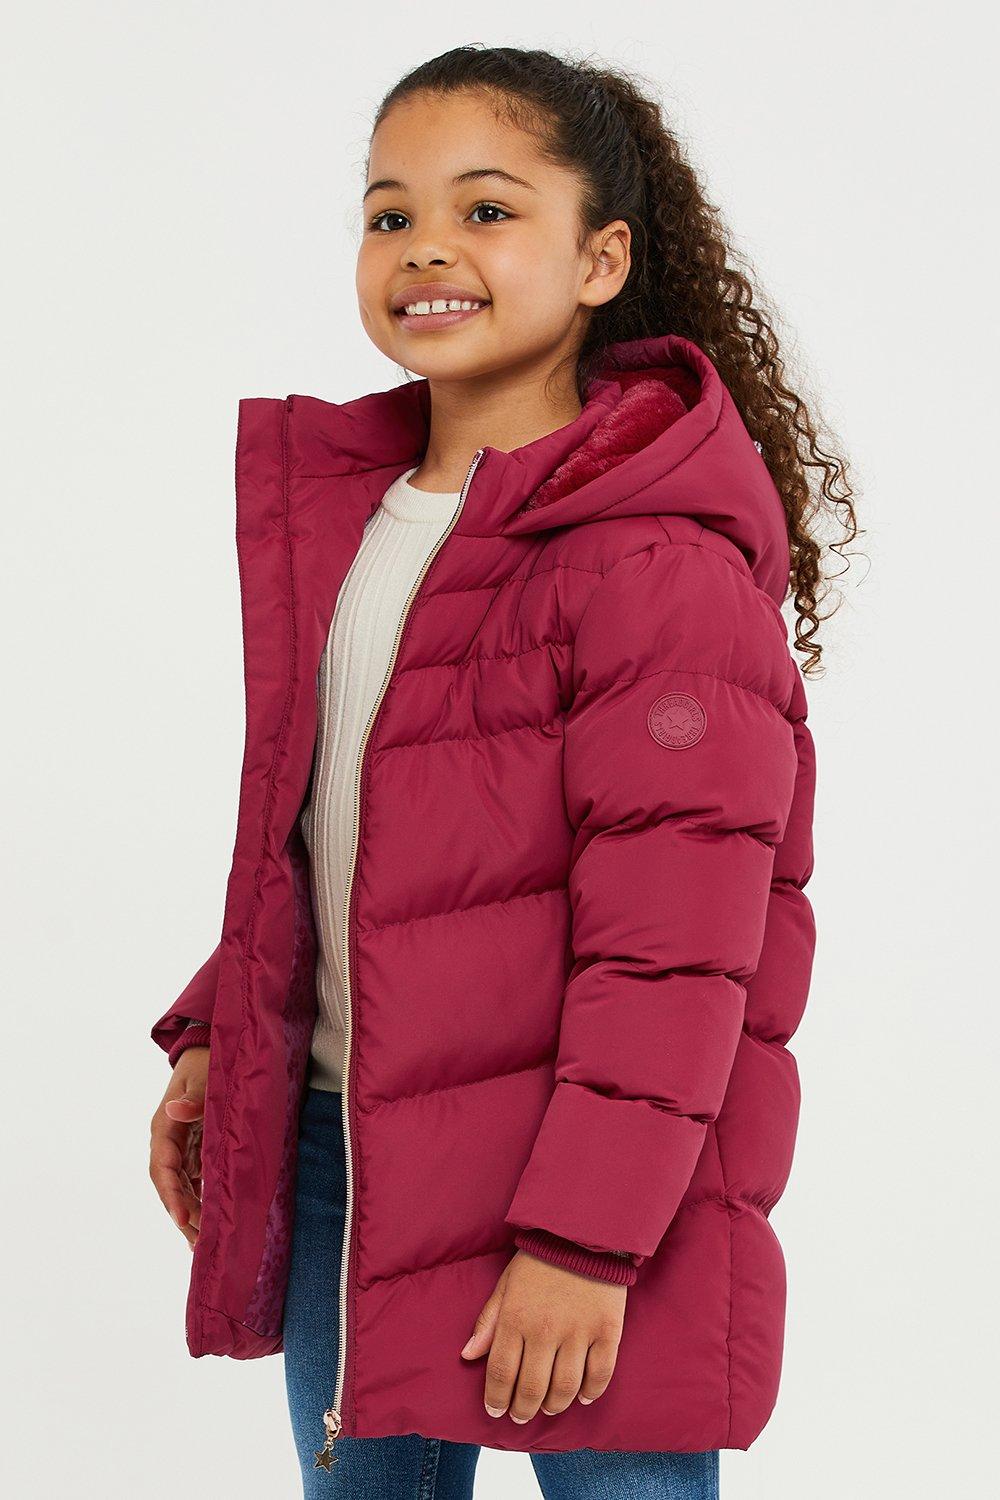 Abercrombie Girls Coats Wholesale Discounts, 62% OFF | 6ballygungeplace.in